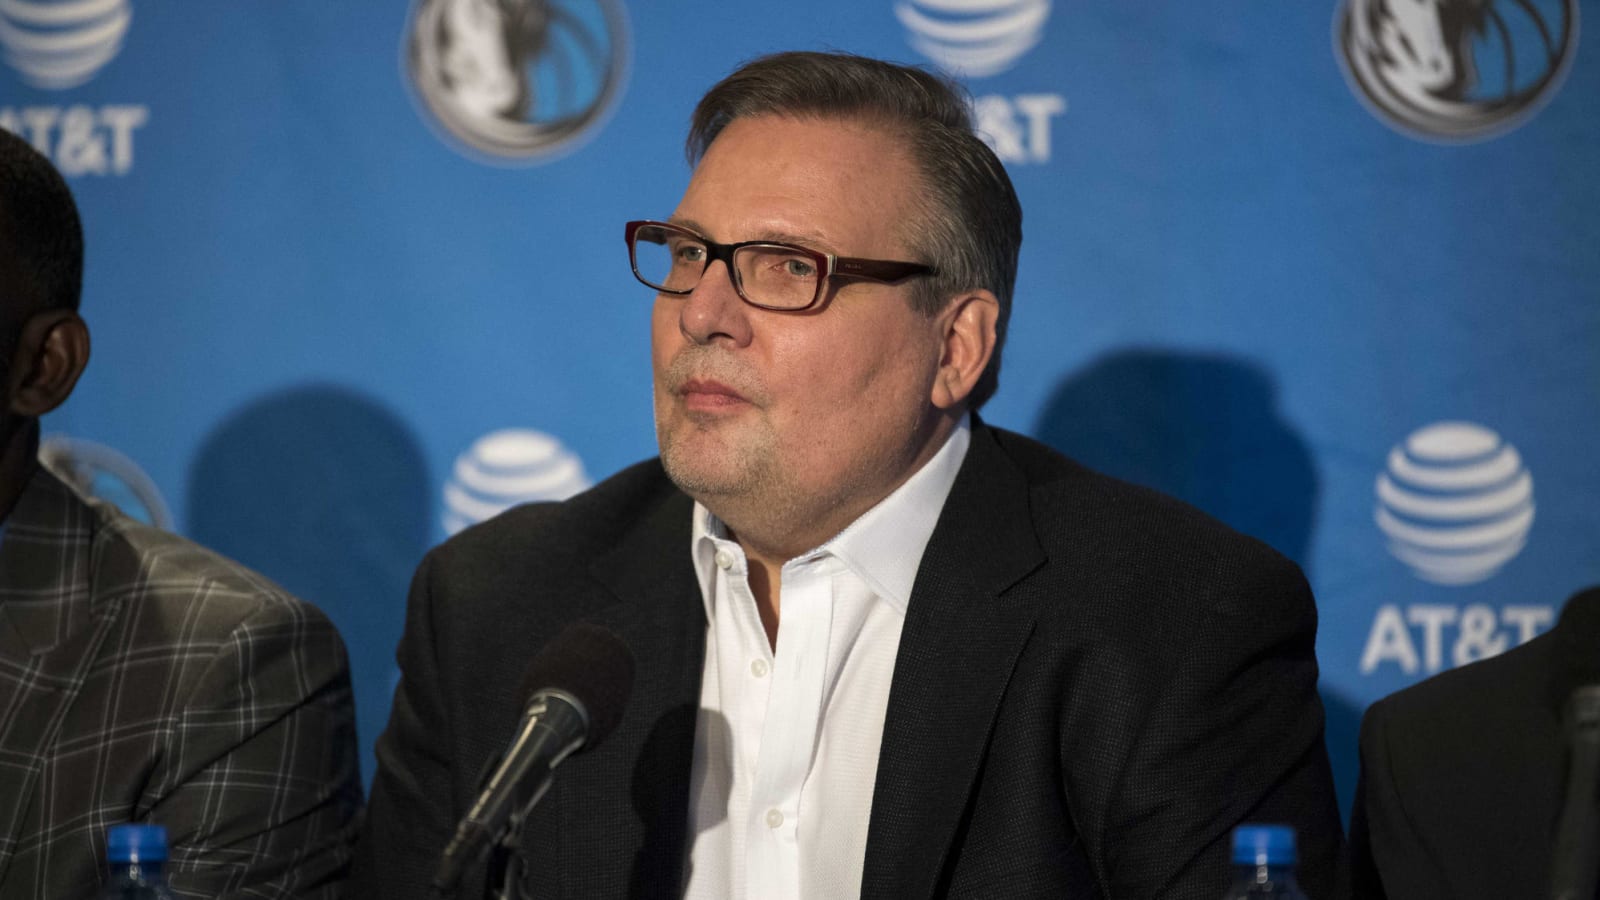 Power struggle led to firing of Mavs GM Donnie Nelson?